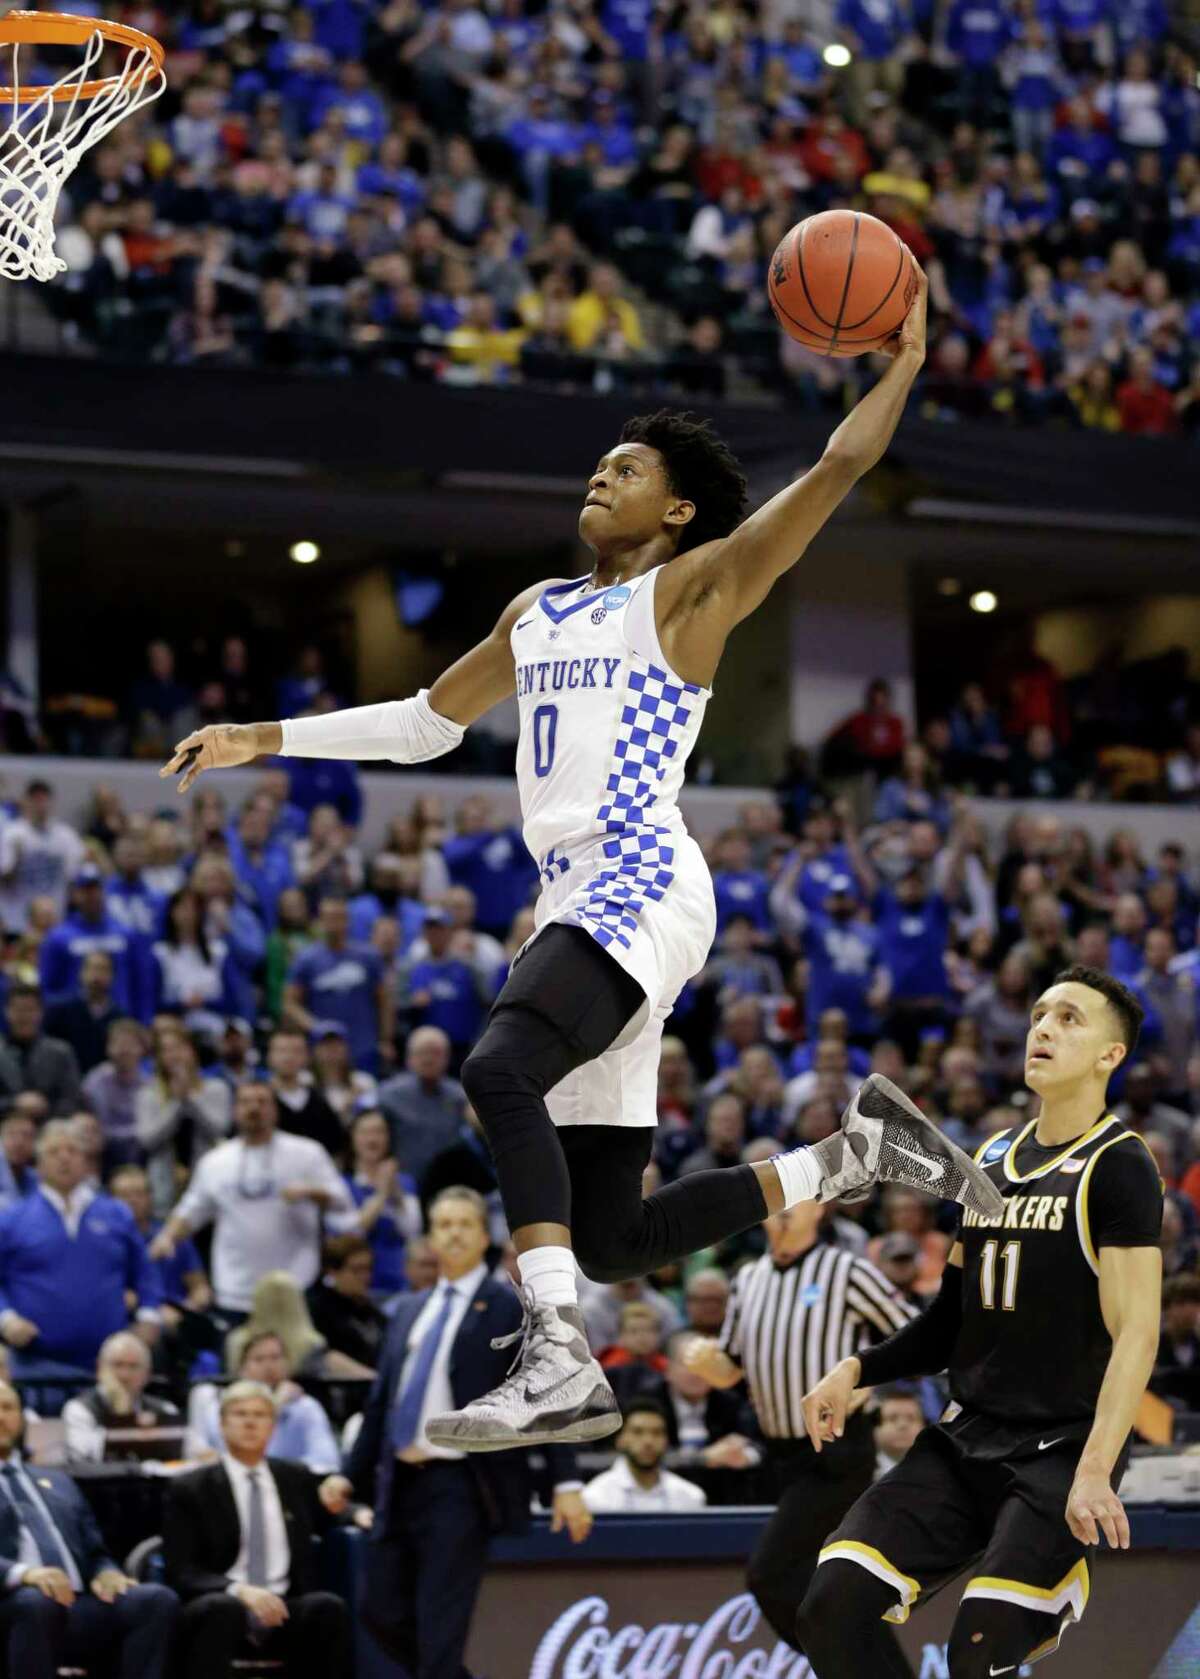 FILE - In this March 19, 2017, file photo, Kentucky guard De'Aaron Fox (0) goes up for a dunk in front of Wichita State guard Landry Shamet (11) during the second half of a second-round game in the men's NCAA college basketball tournament, in Indianapolis. Fox is expected to be a picked at the NBA Draft. (AP Photo/Michael Conroy, File)